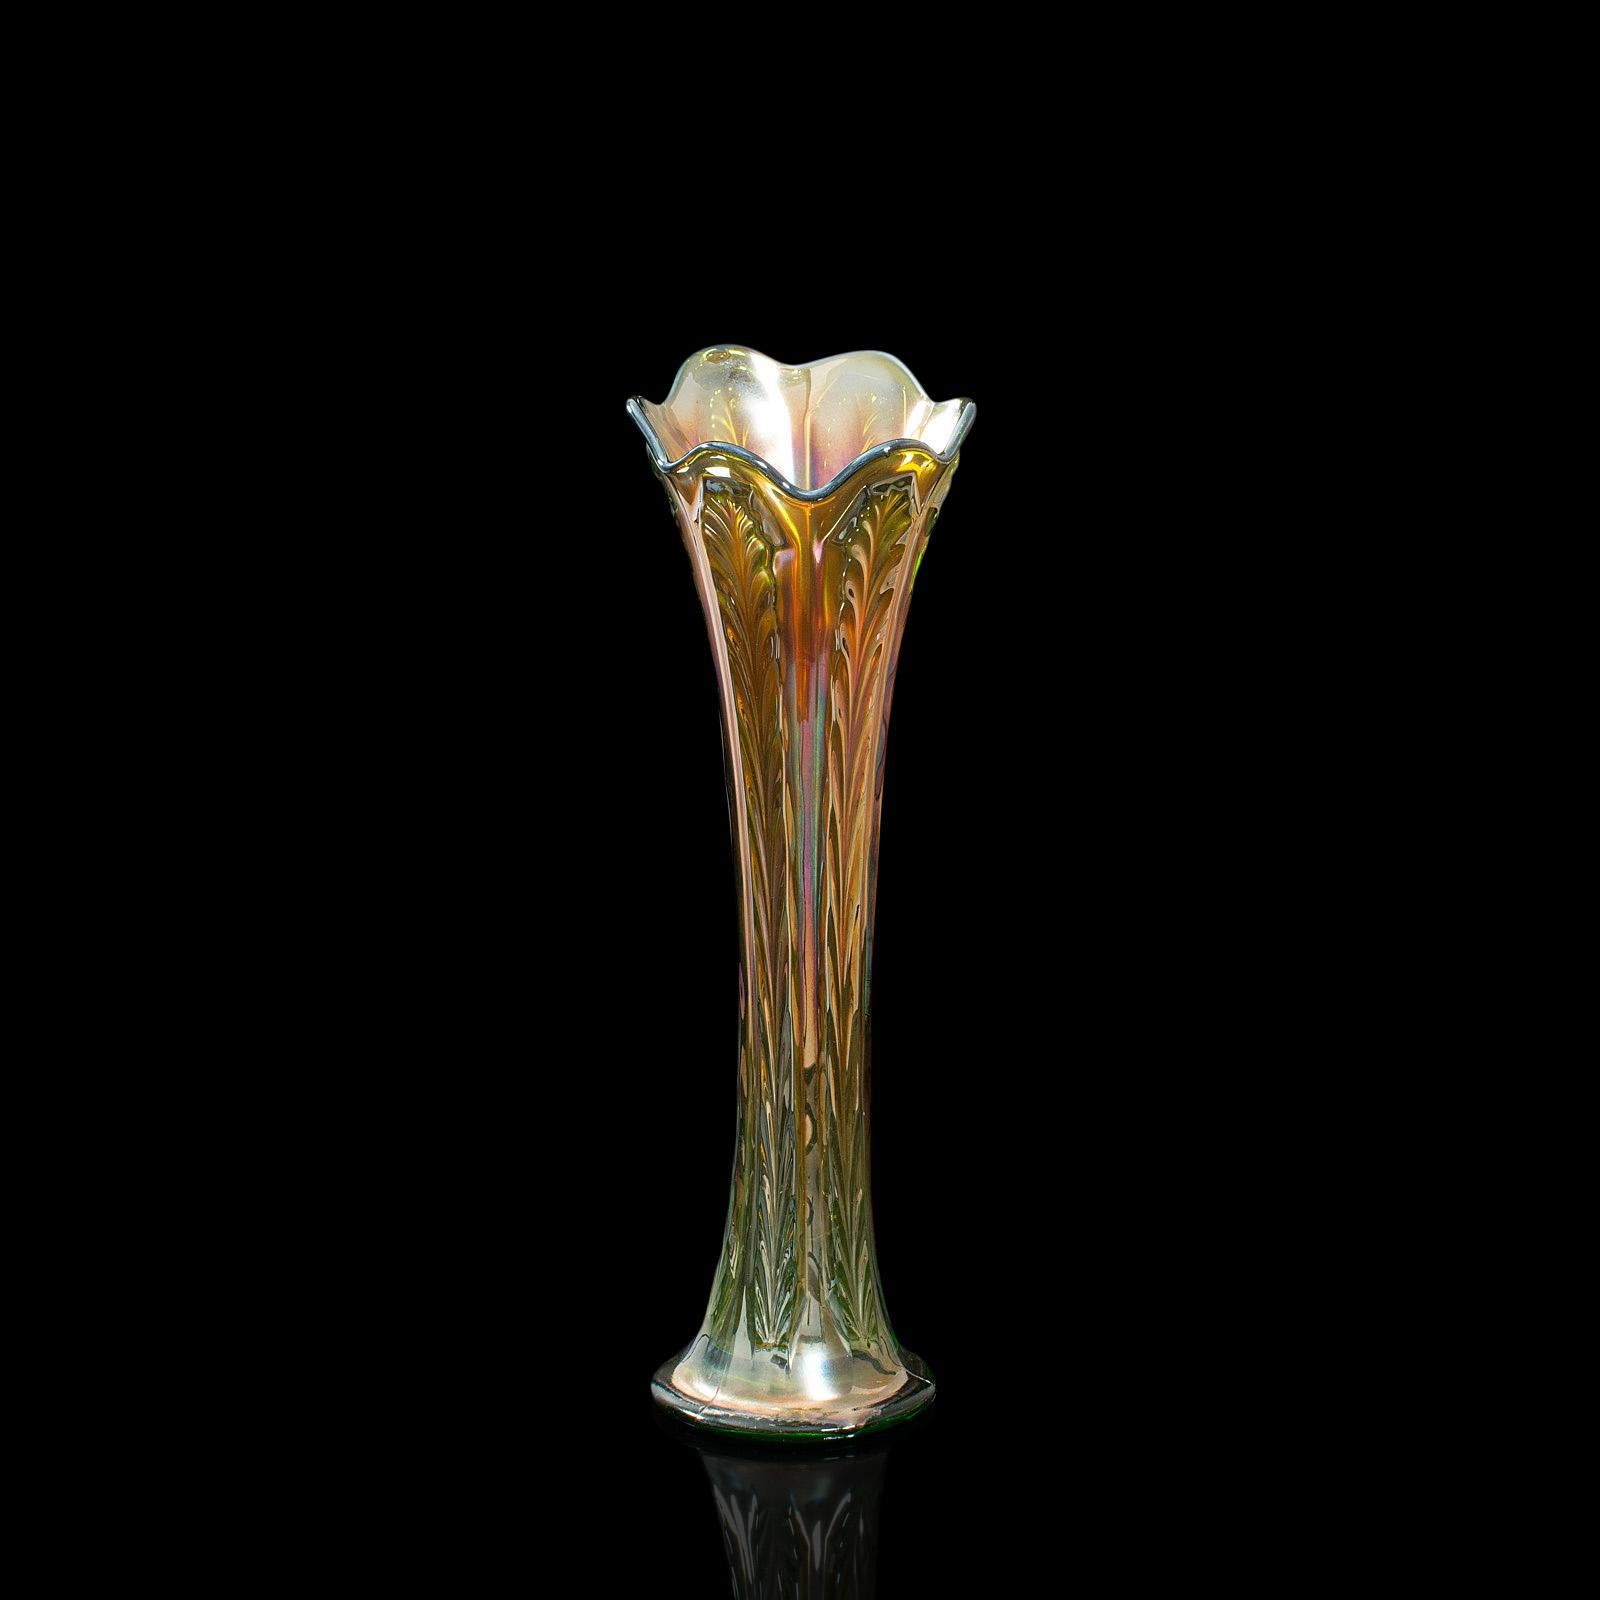 This is a fine vintage carnival vase. An English, glass decorative flower vase with lustre finish, dating to the mid 20th century, circa 1930.

Radiant hues with superb detailing
Displaying a desirable aged patina and in good original